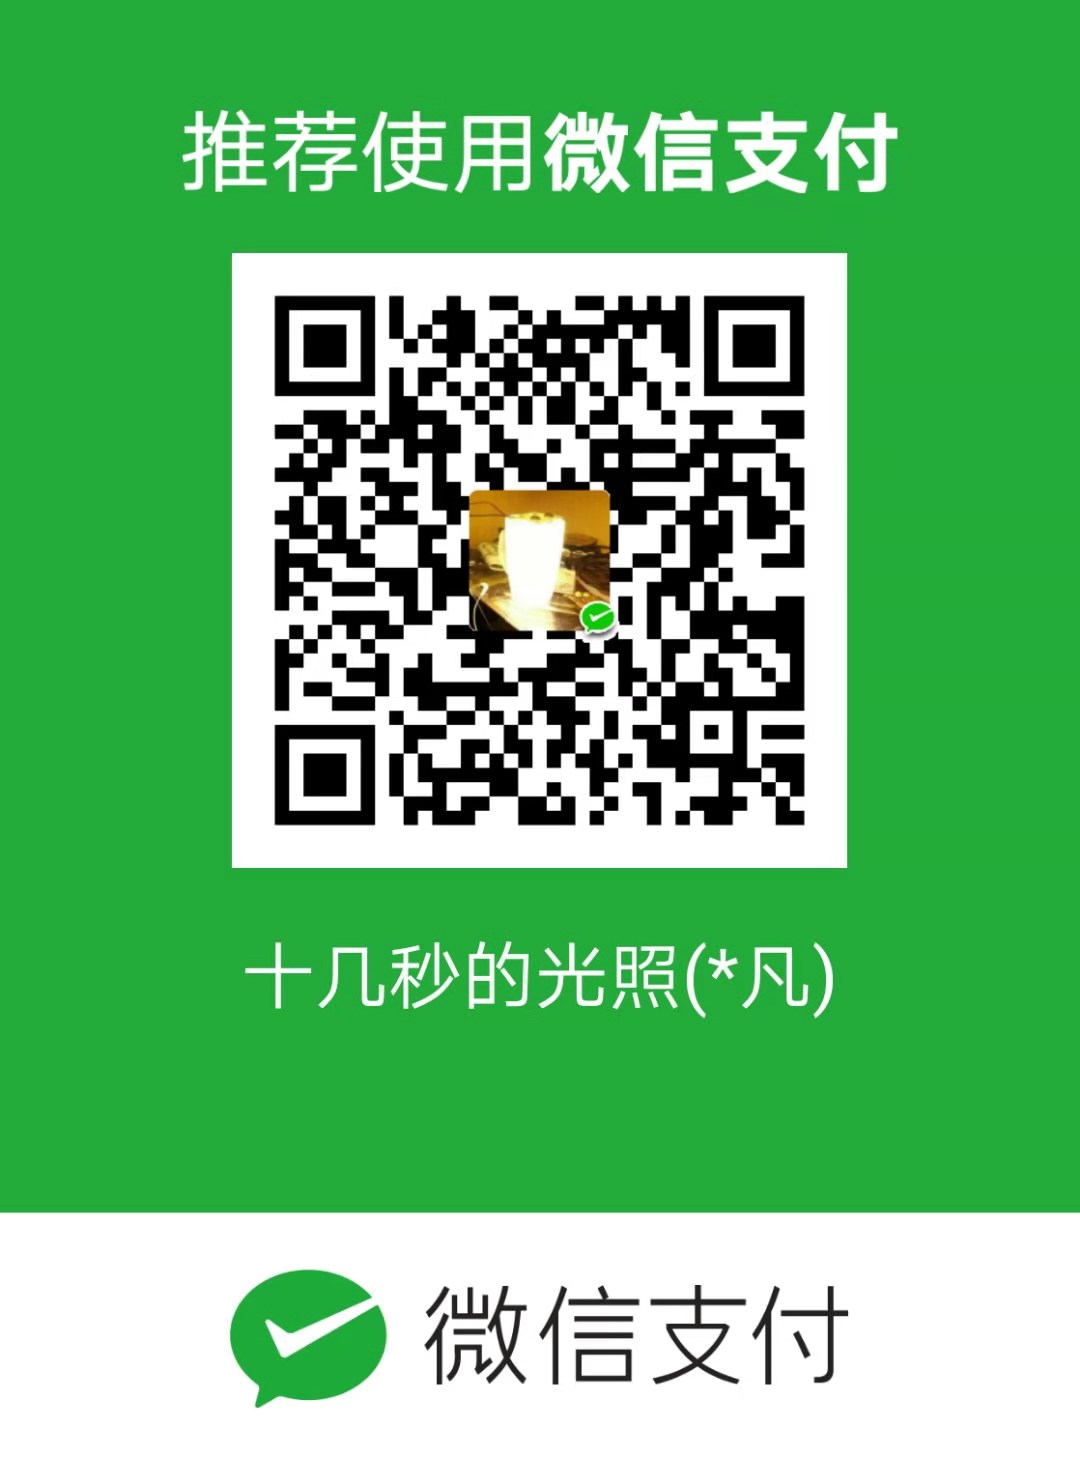 wechat for windows 8